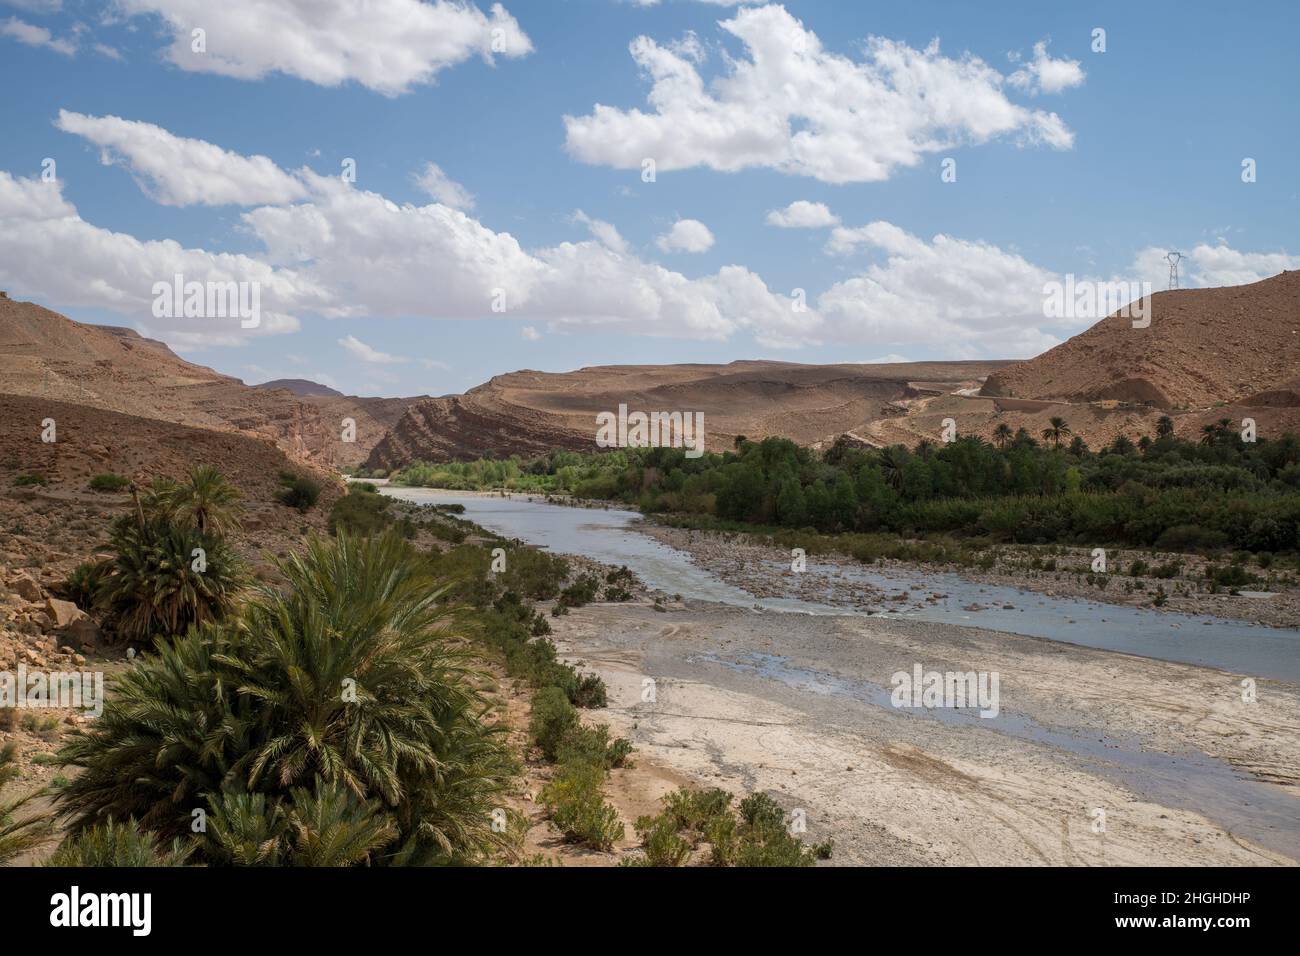 The Draa river valley in Morocco with palm tress and water. Stock Photo